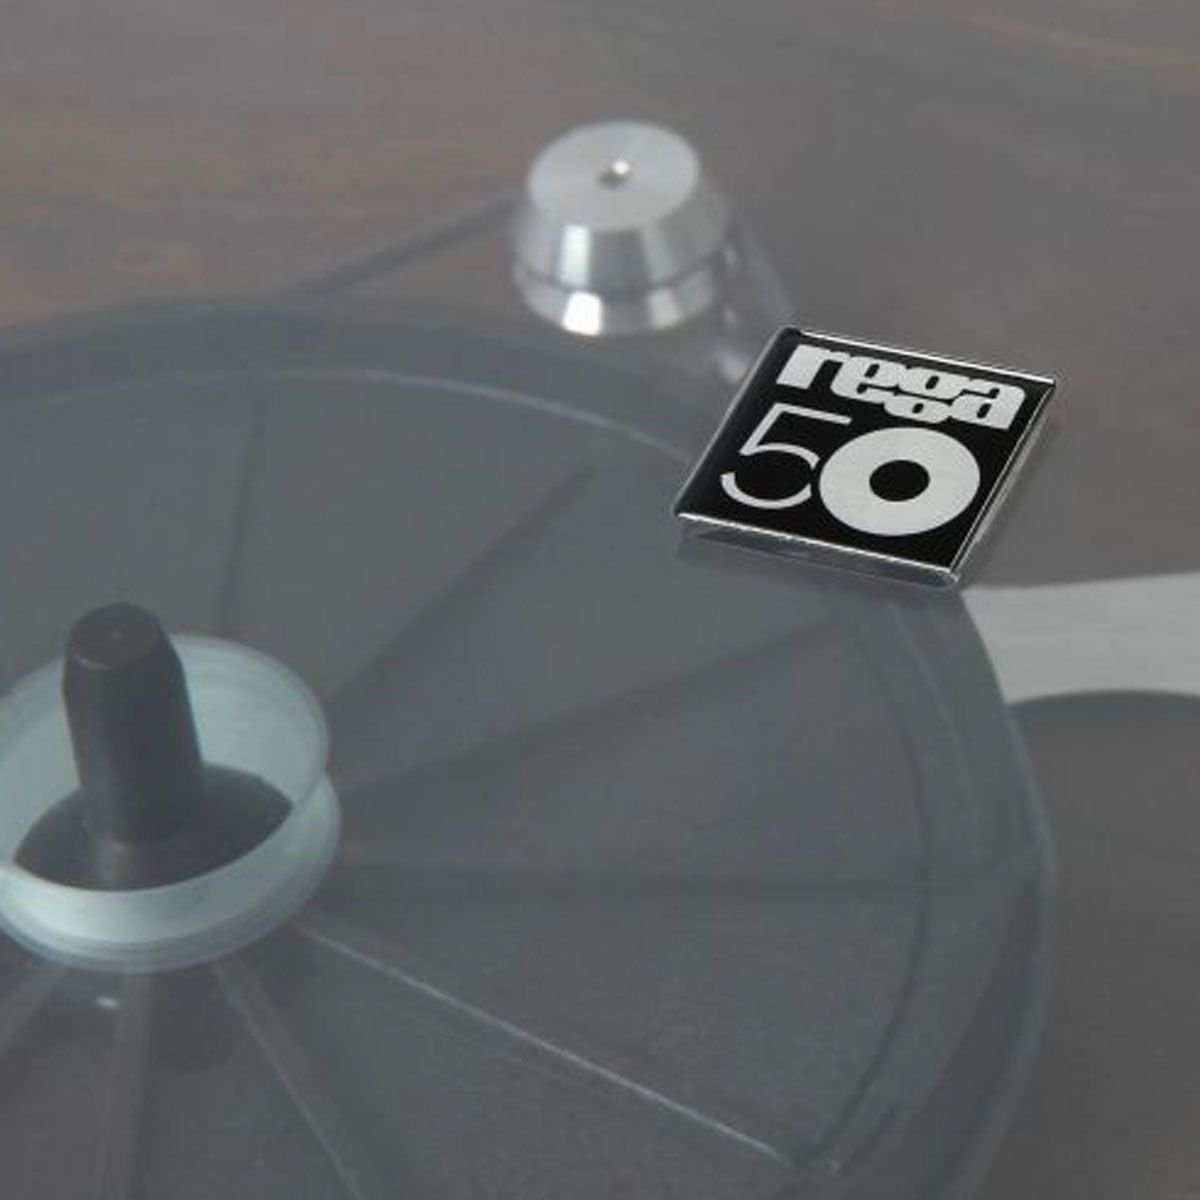 Rega Planar 3 50th Anniversary Edition Turntable - Walnut close-up of 50th anniversary badge on dustcover